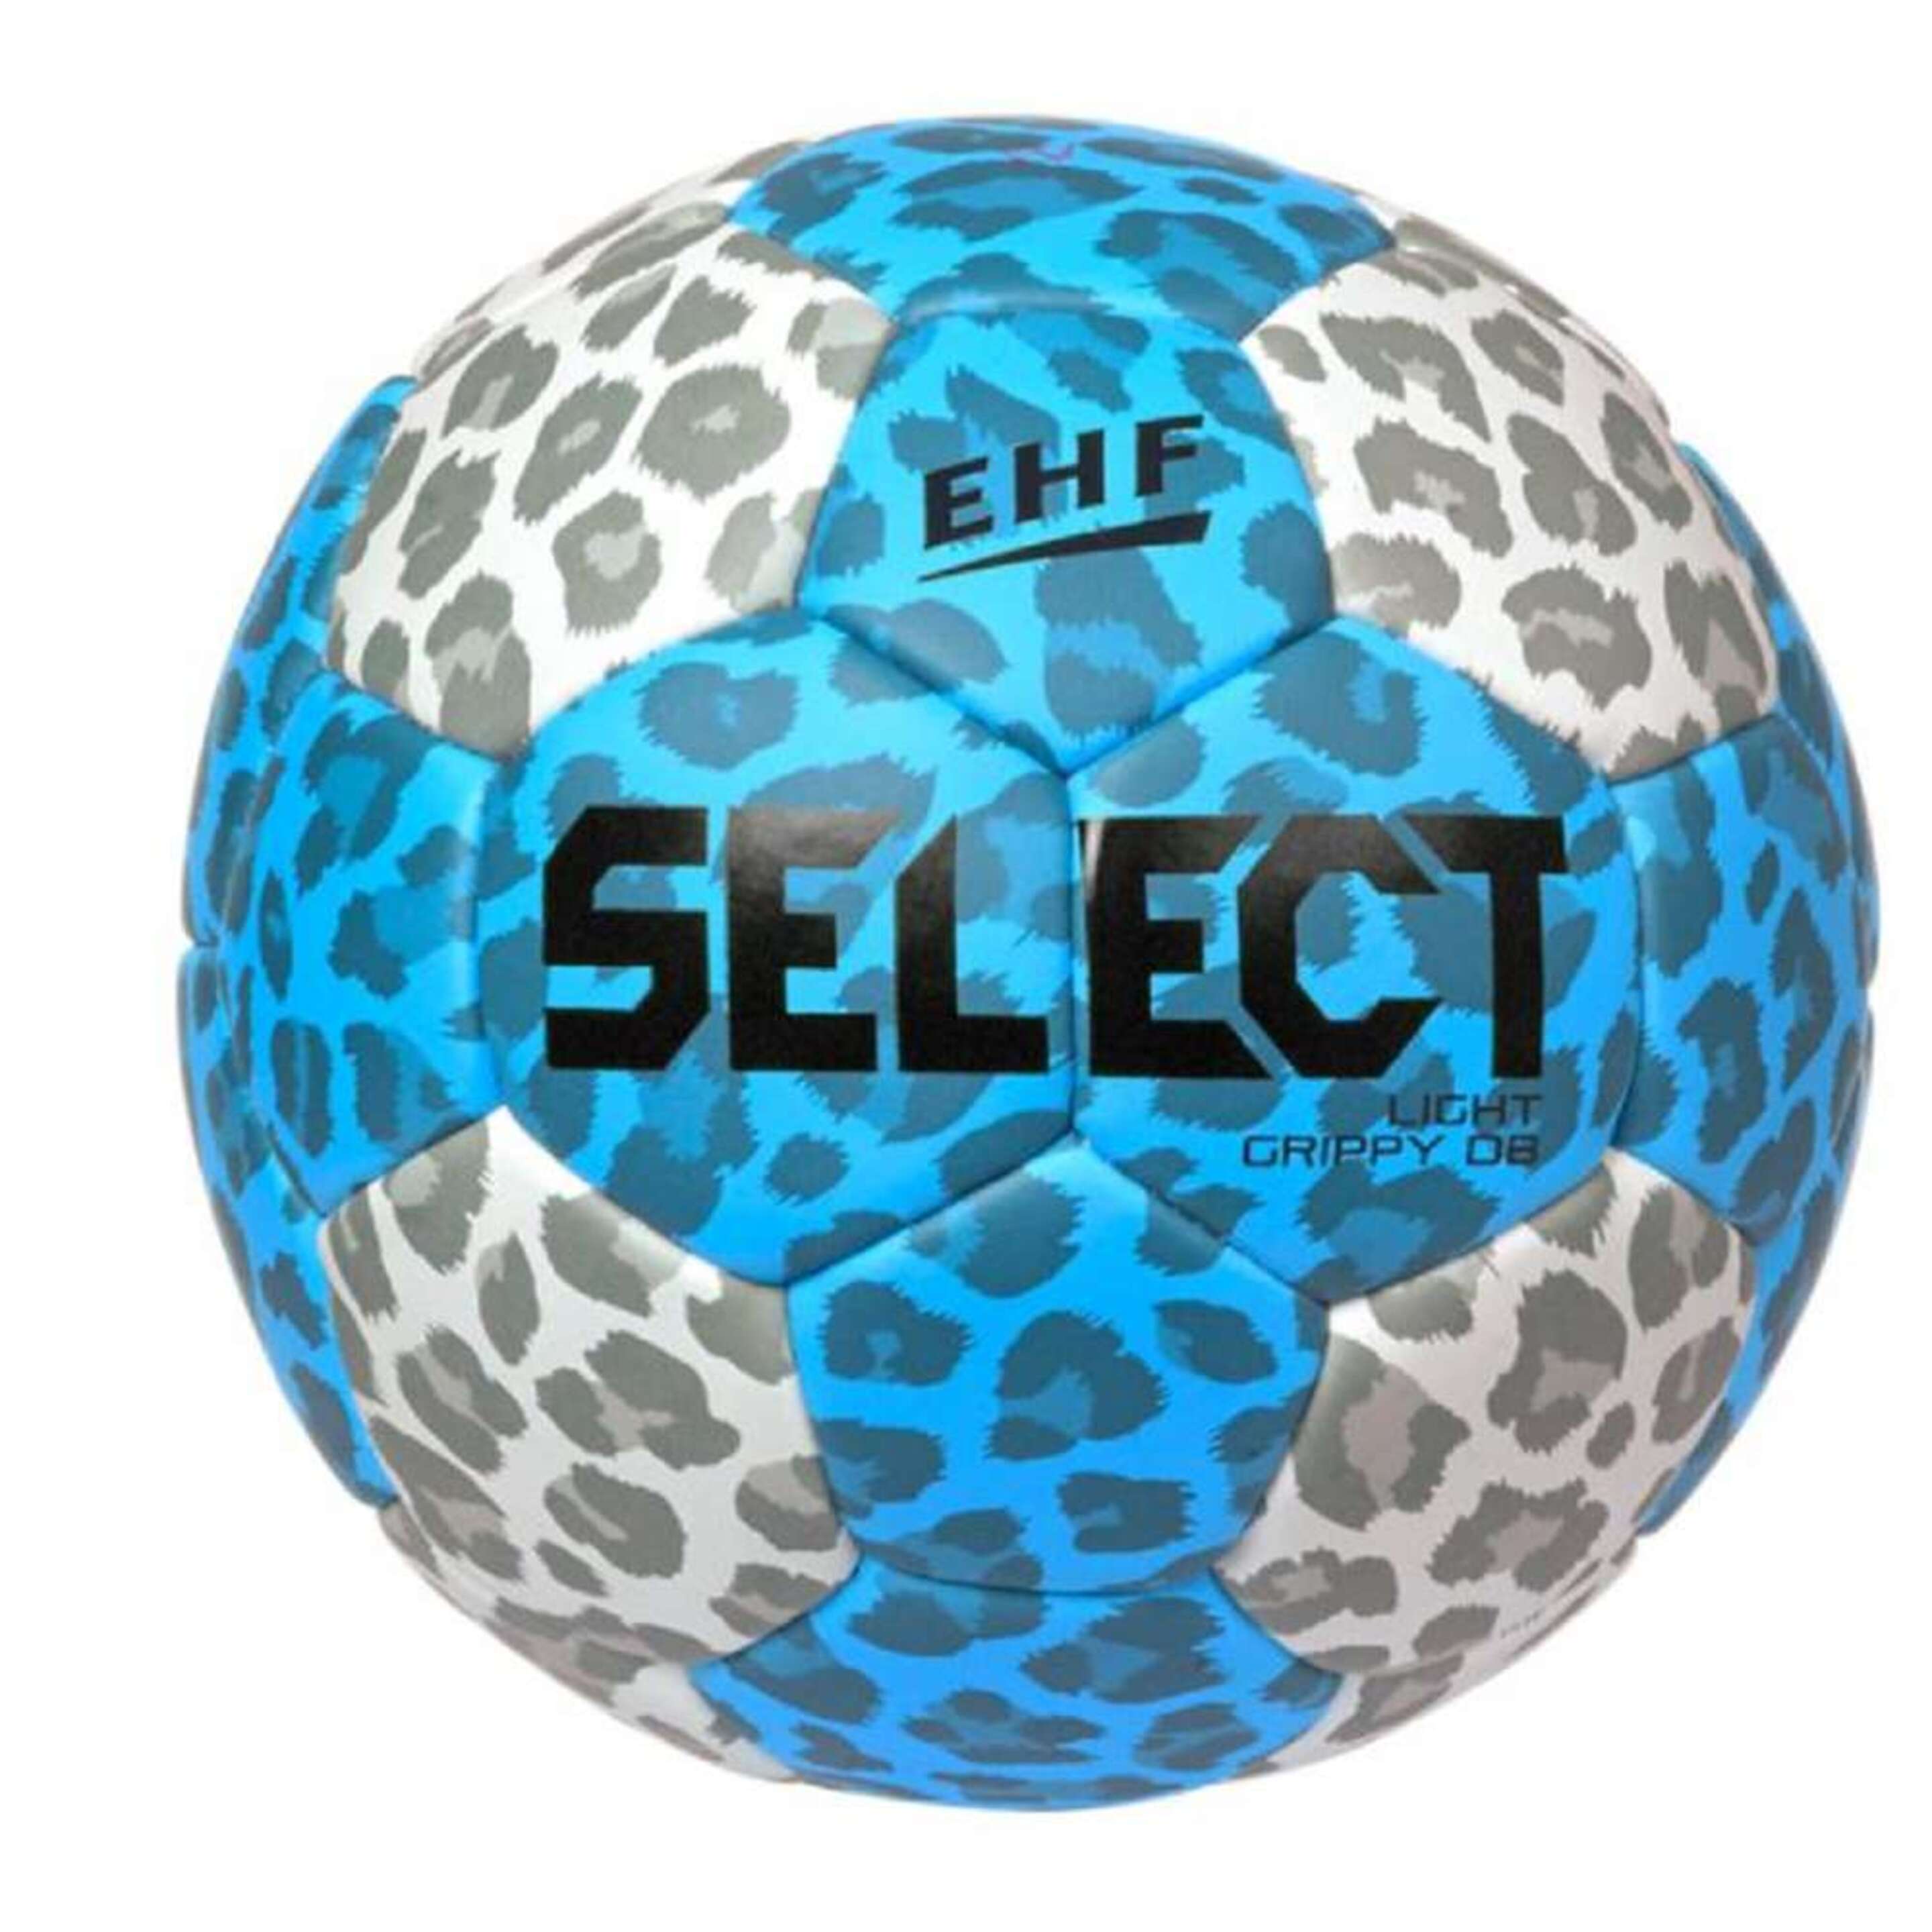 Bola Andebol Select Light Grippy 2022